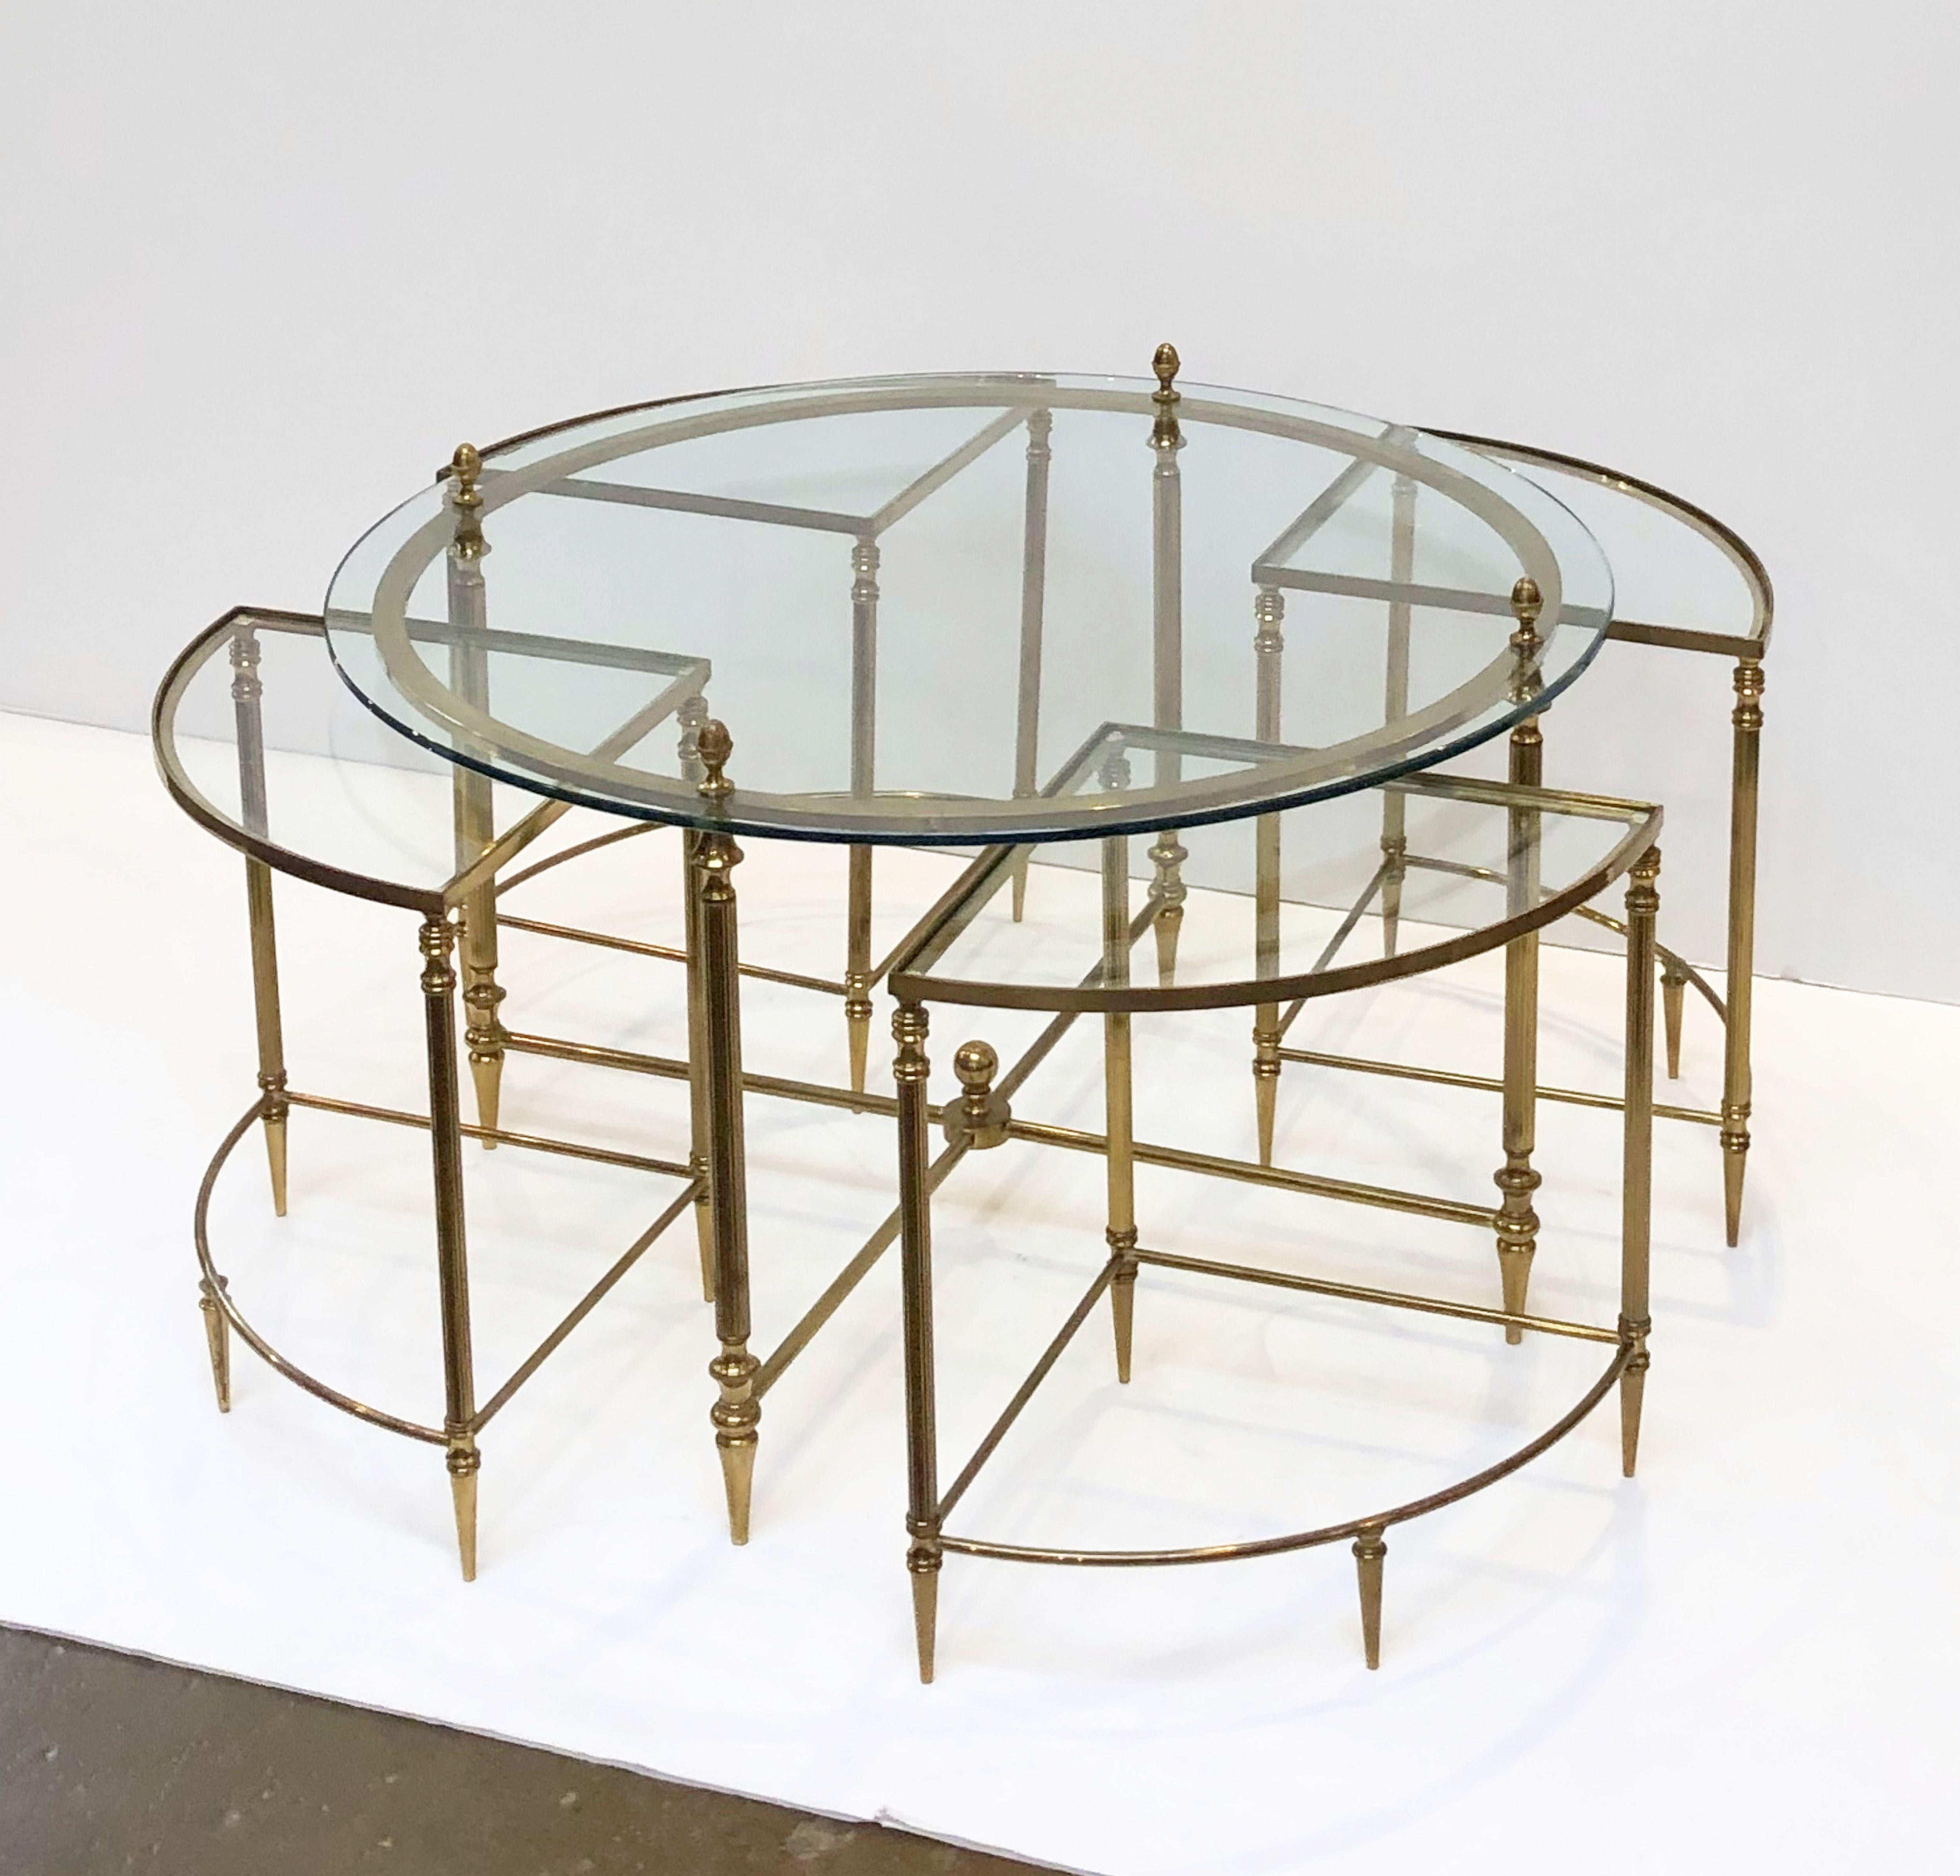 A fine French circular low cocktail (or coffee) table of brass and glass featuring a round top table with four wedge-shaped nesting under-tables.

The 'gigogne' tables consist of a set of small lightweight tables that fit under the larger table to